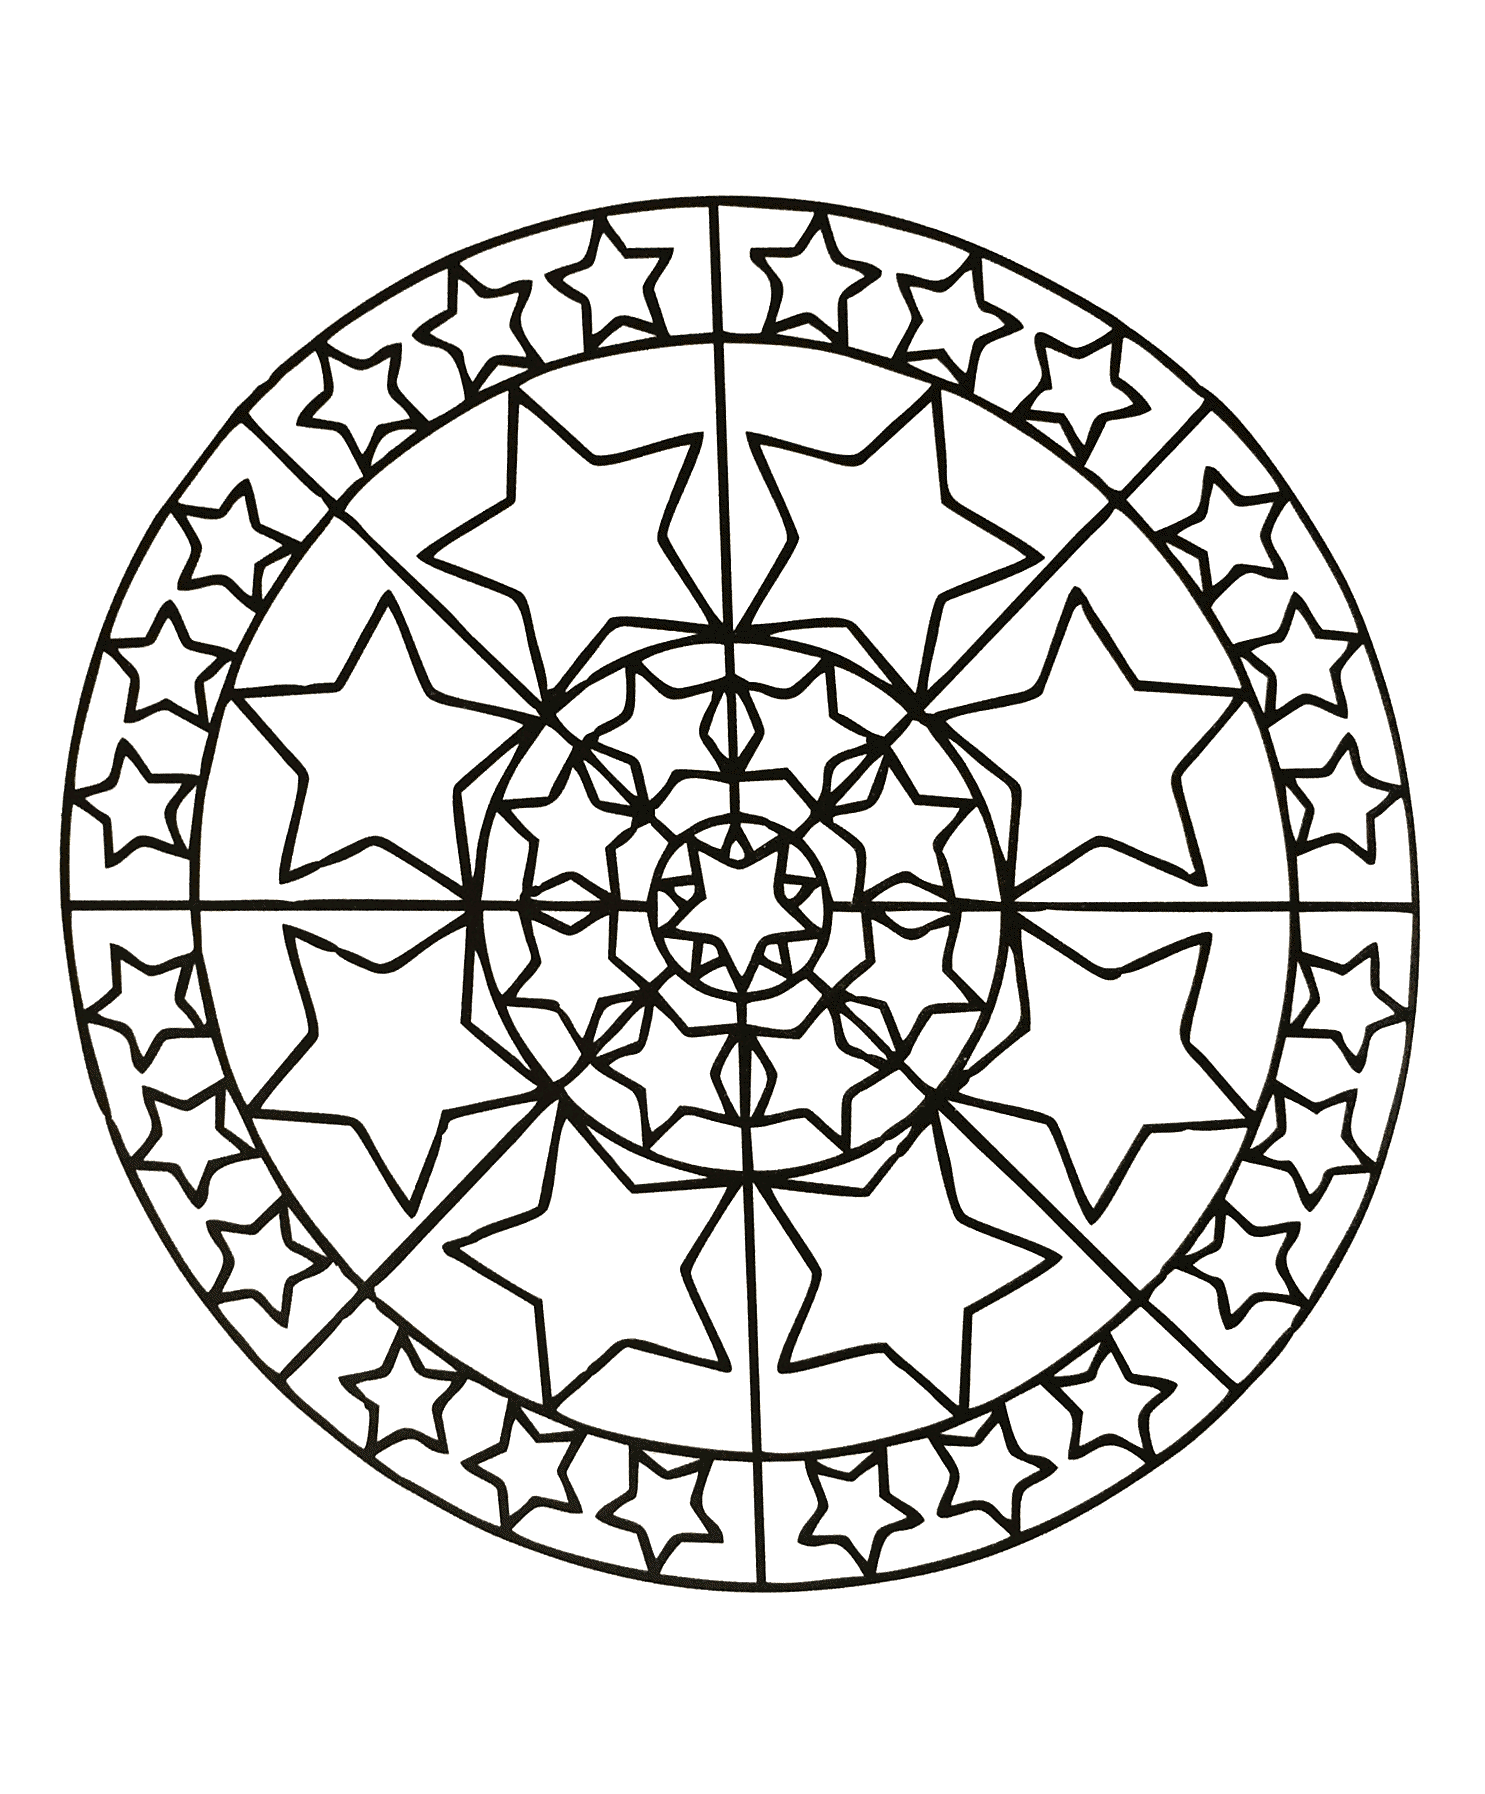 A Mandala coloring page with elegant and symmetrical stars, perfect if you like Anti-stress coloring pages, and if you like to express your creativity.